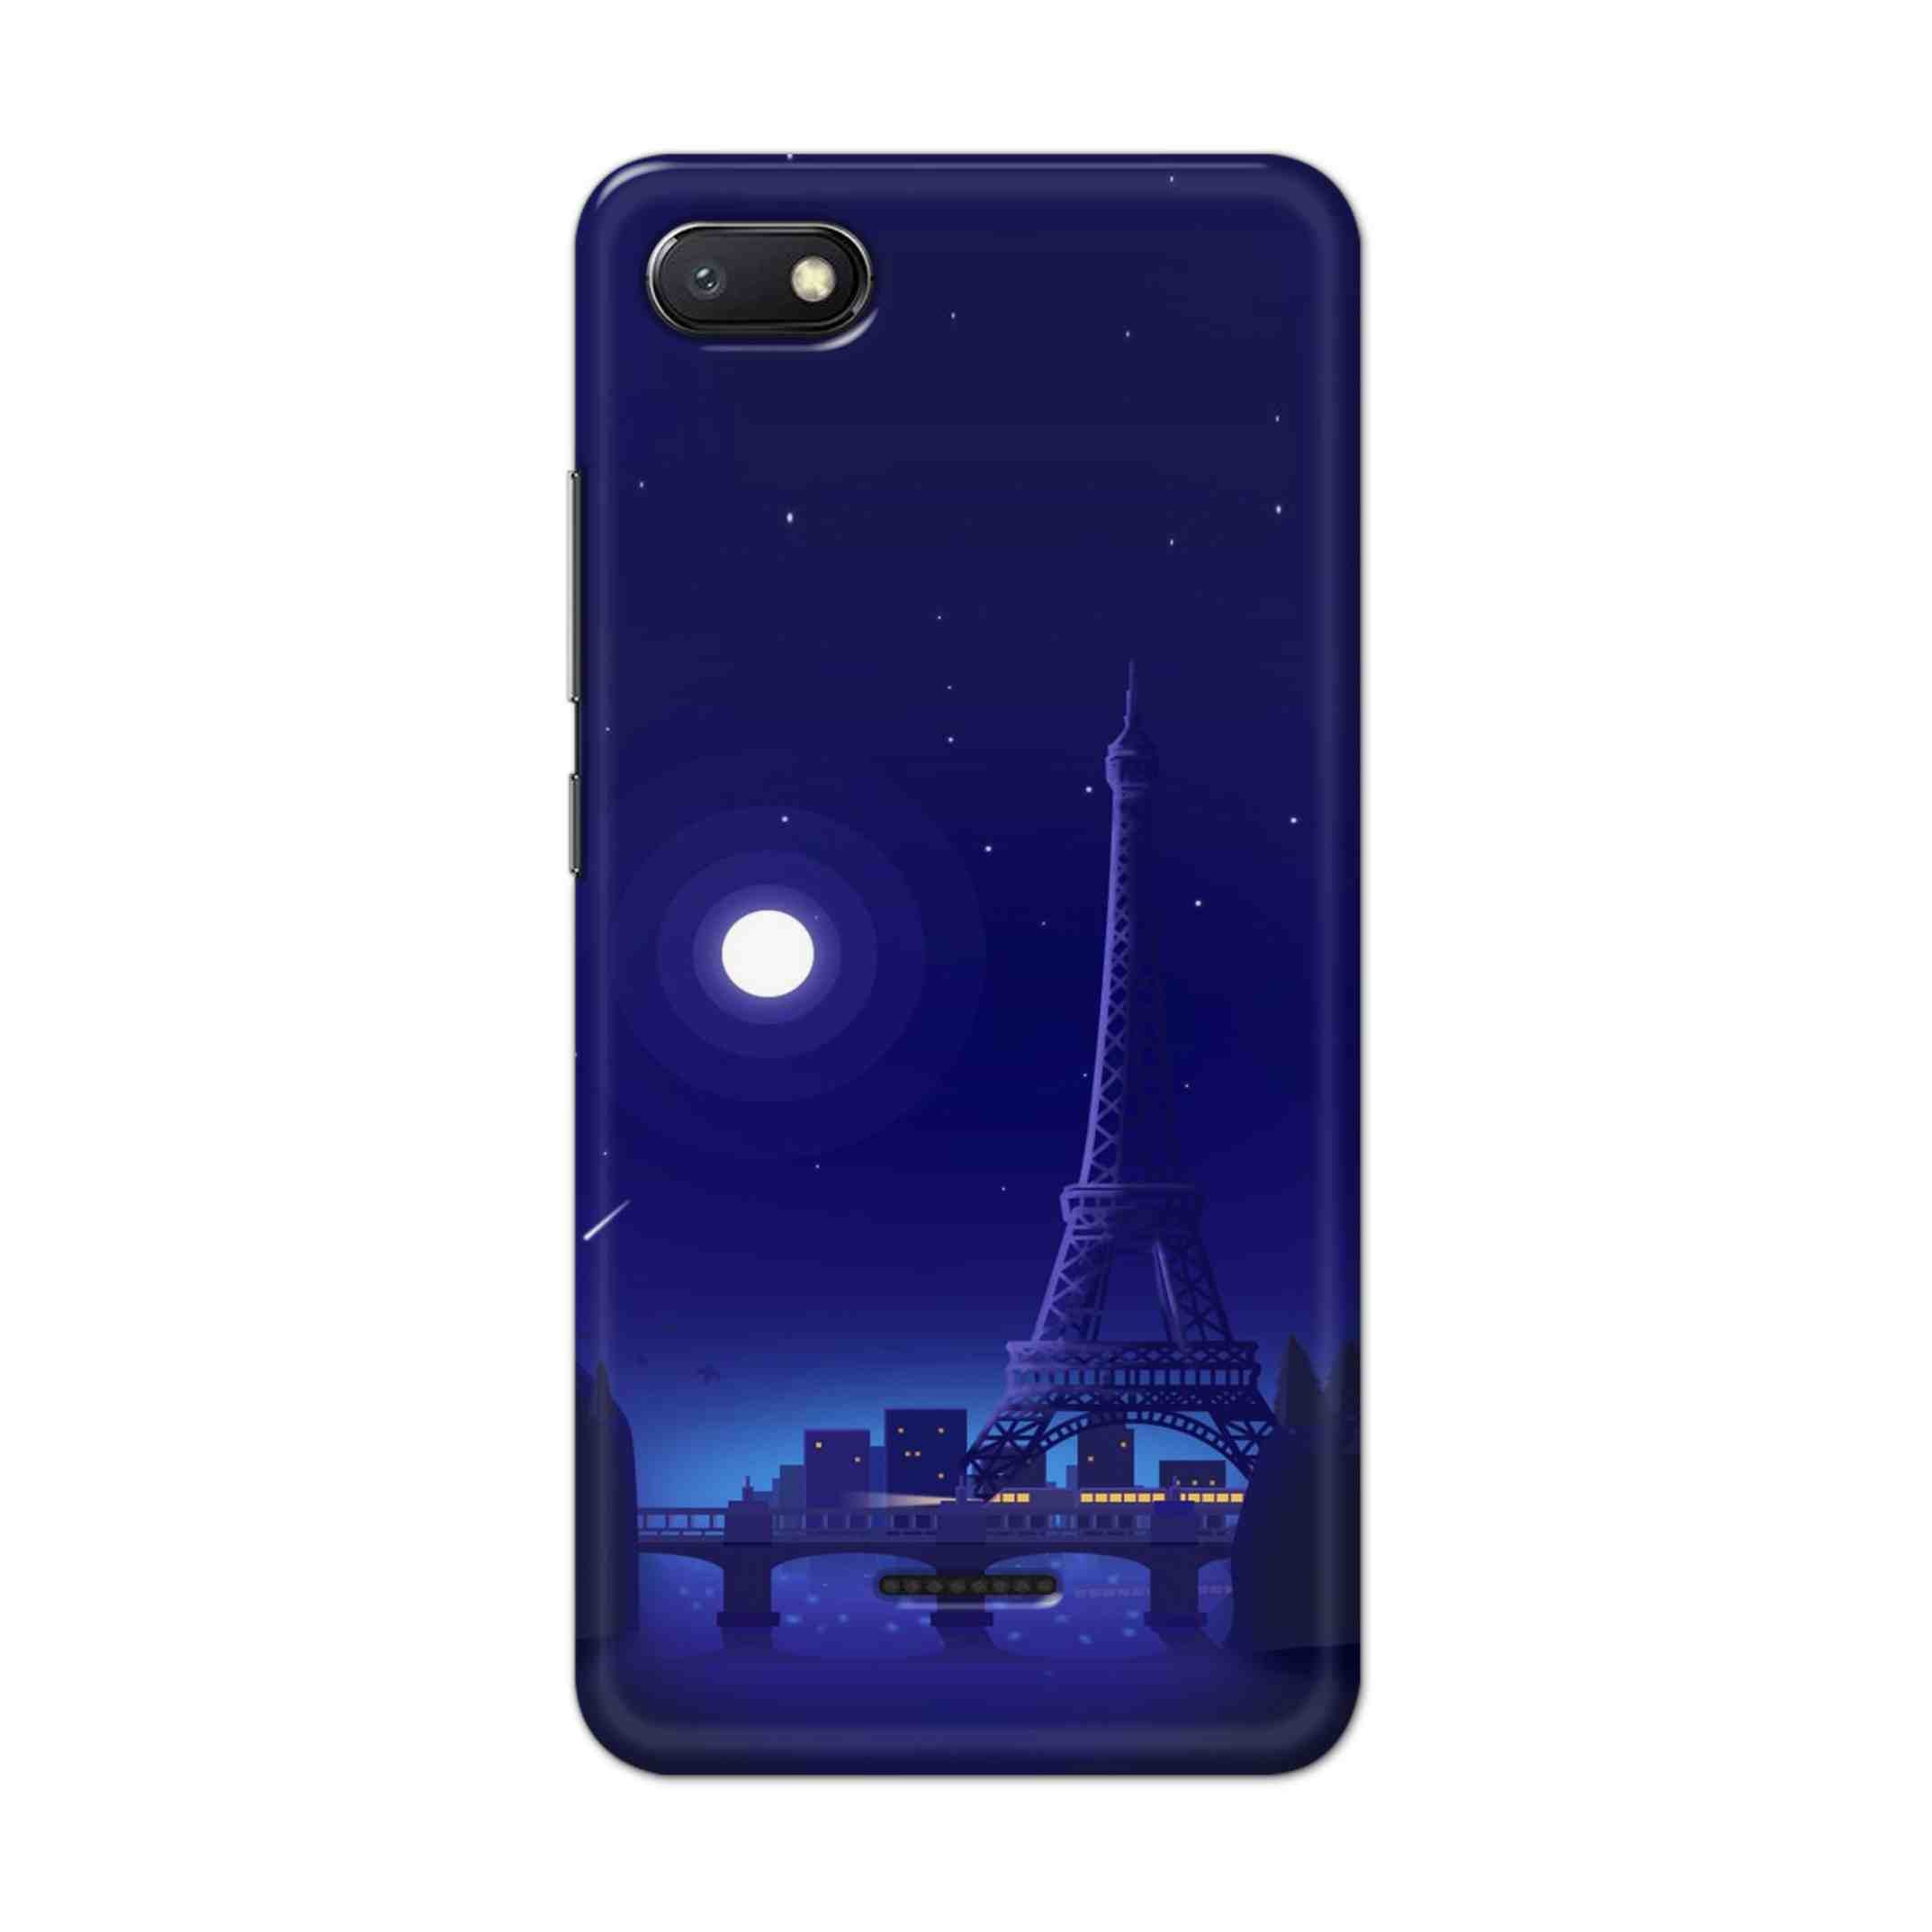 Buy Night Eifferl Tower Hard Back Mobile Phone Case/Cover For Xiaomi Redmi 6A Online